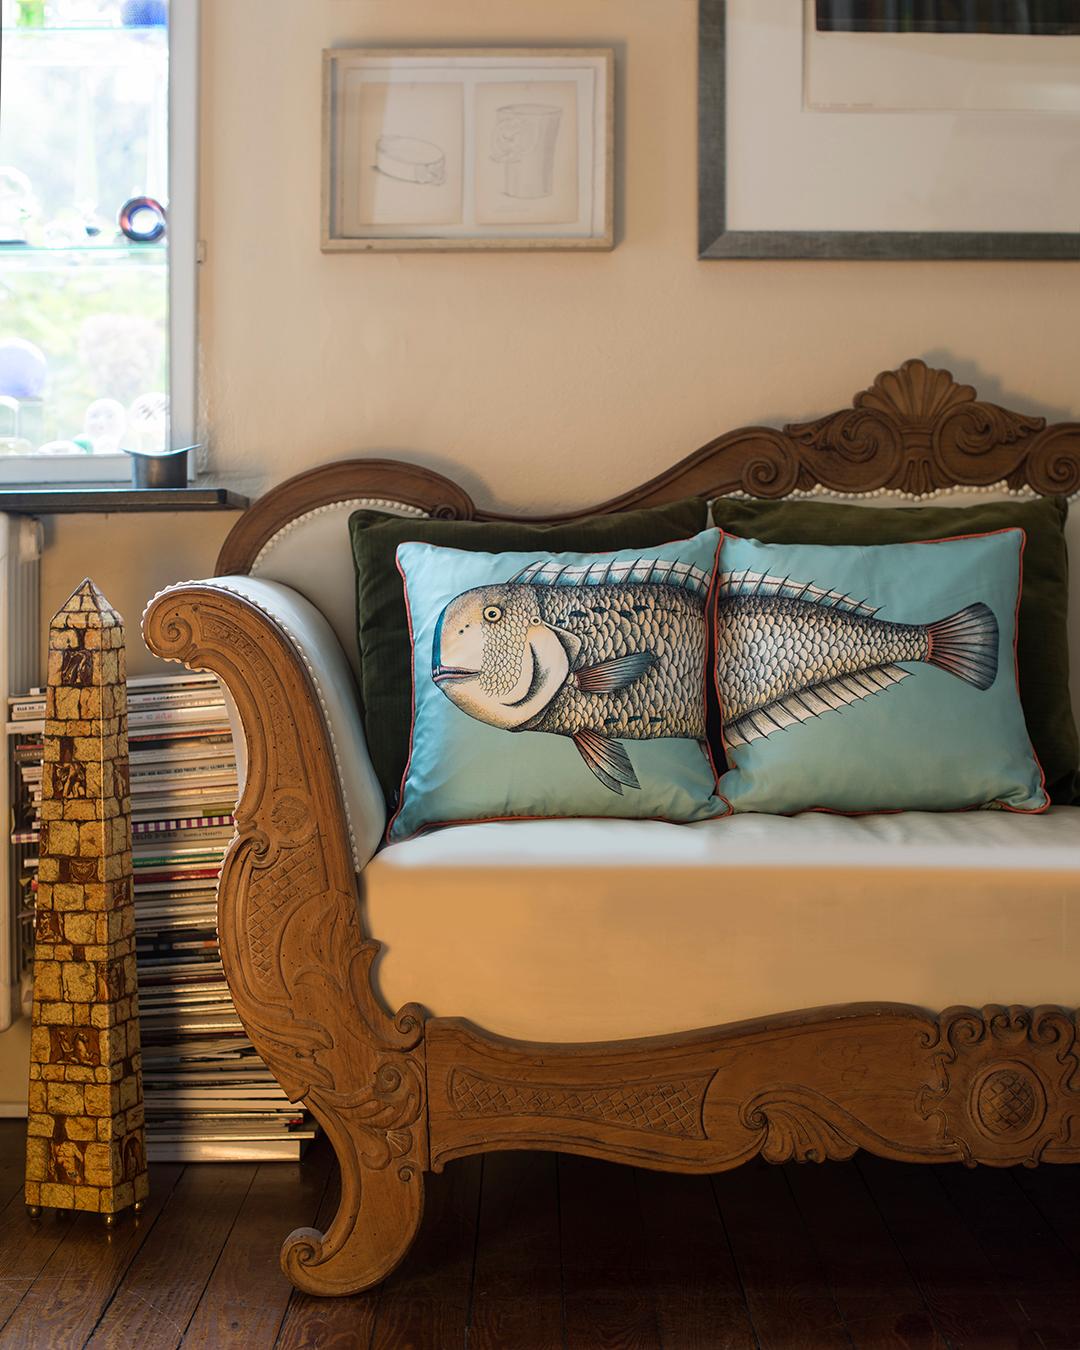 The Fornasetti cushions will add to each room an unexpected detail thanks to the most iconic Italian atelier designs.

It is a set of two cushions depicting the famous Fornasetti decoration of the fish divided in two parts. 

Cushion cover